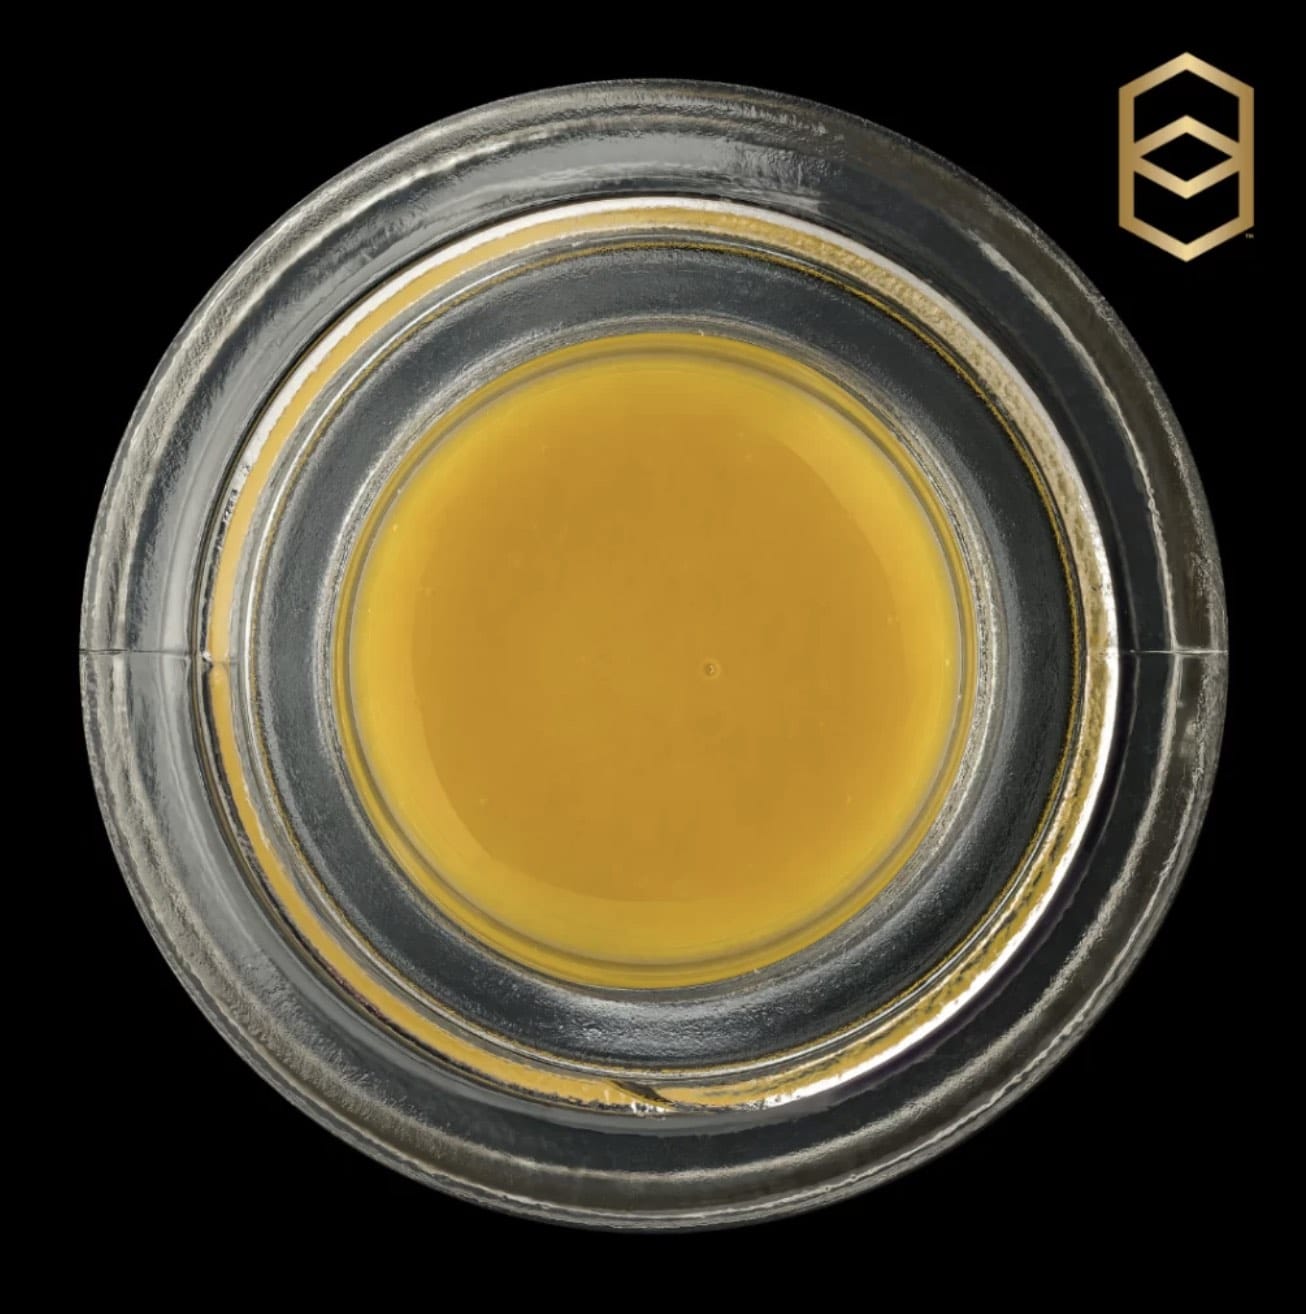 Ghost OG Wax from Dabstrac